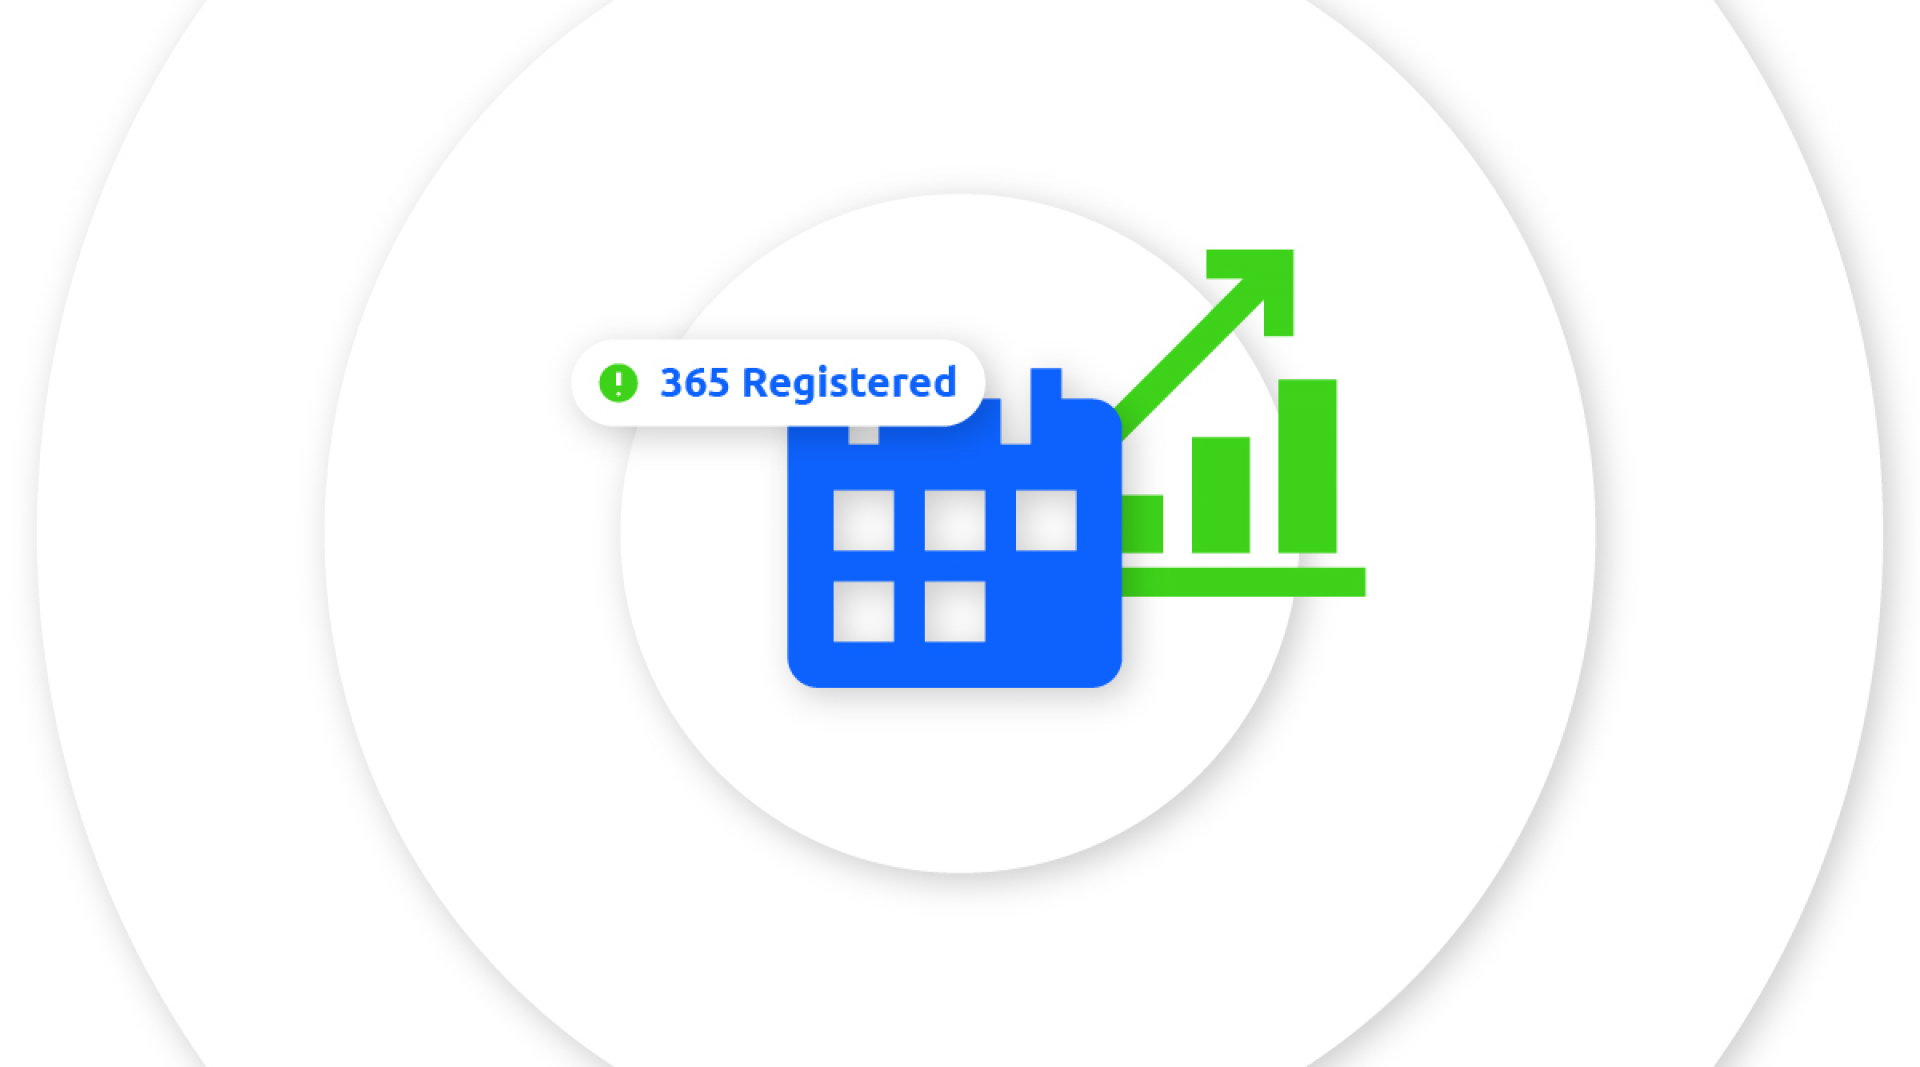 6 Strategies to Increase Event Registration Rates for an Upcoming Event